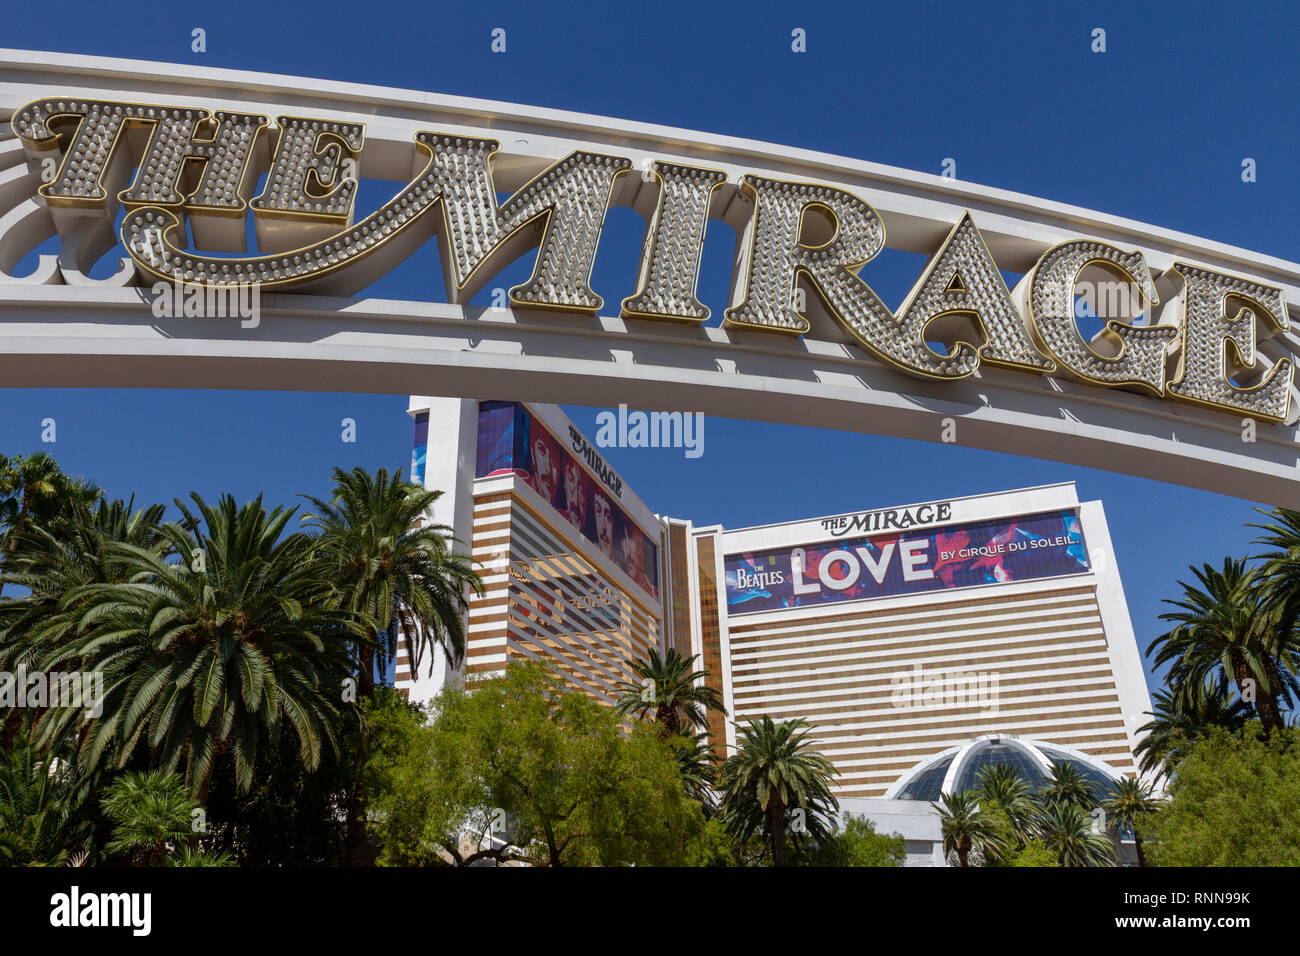 The Mirage Hotel And Casino on The Strip, Las Vegas, Nevada, United States. Stock Photo